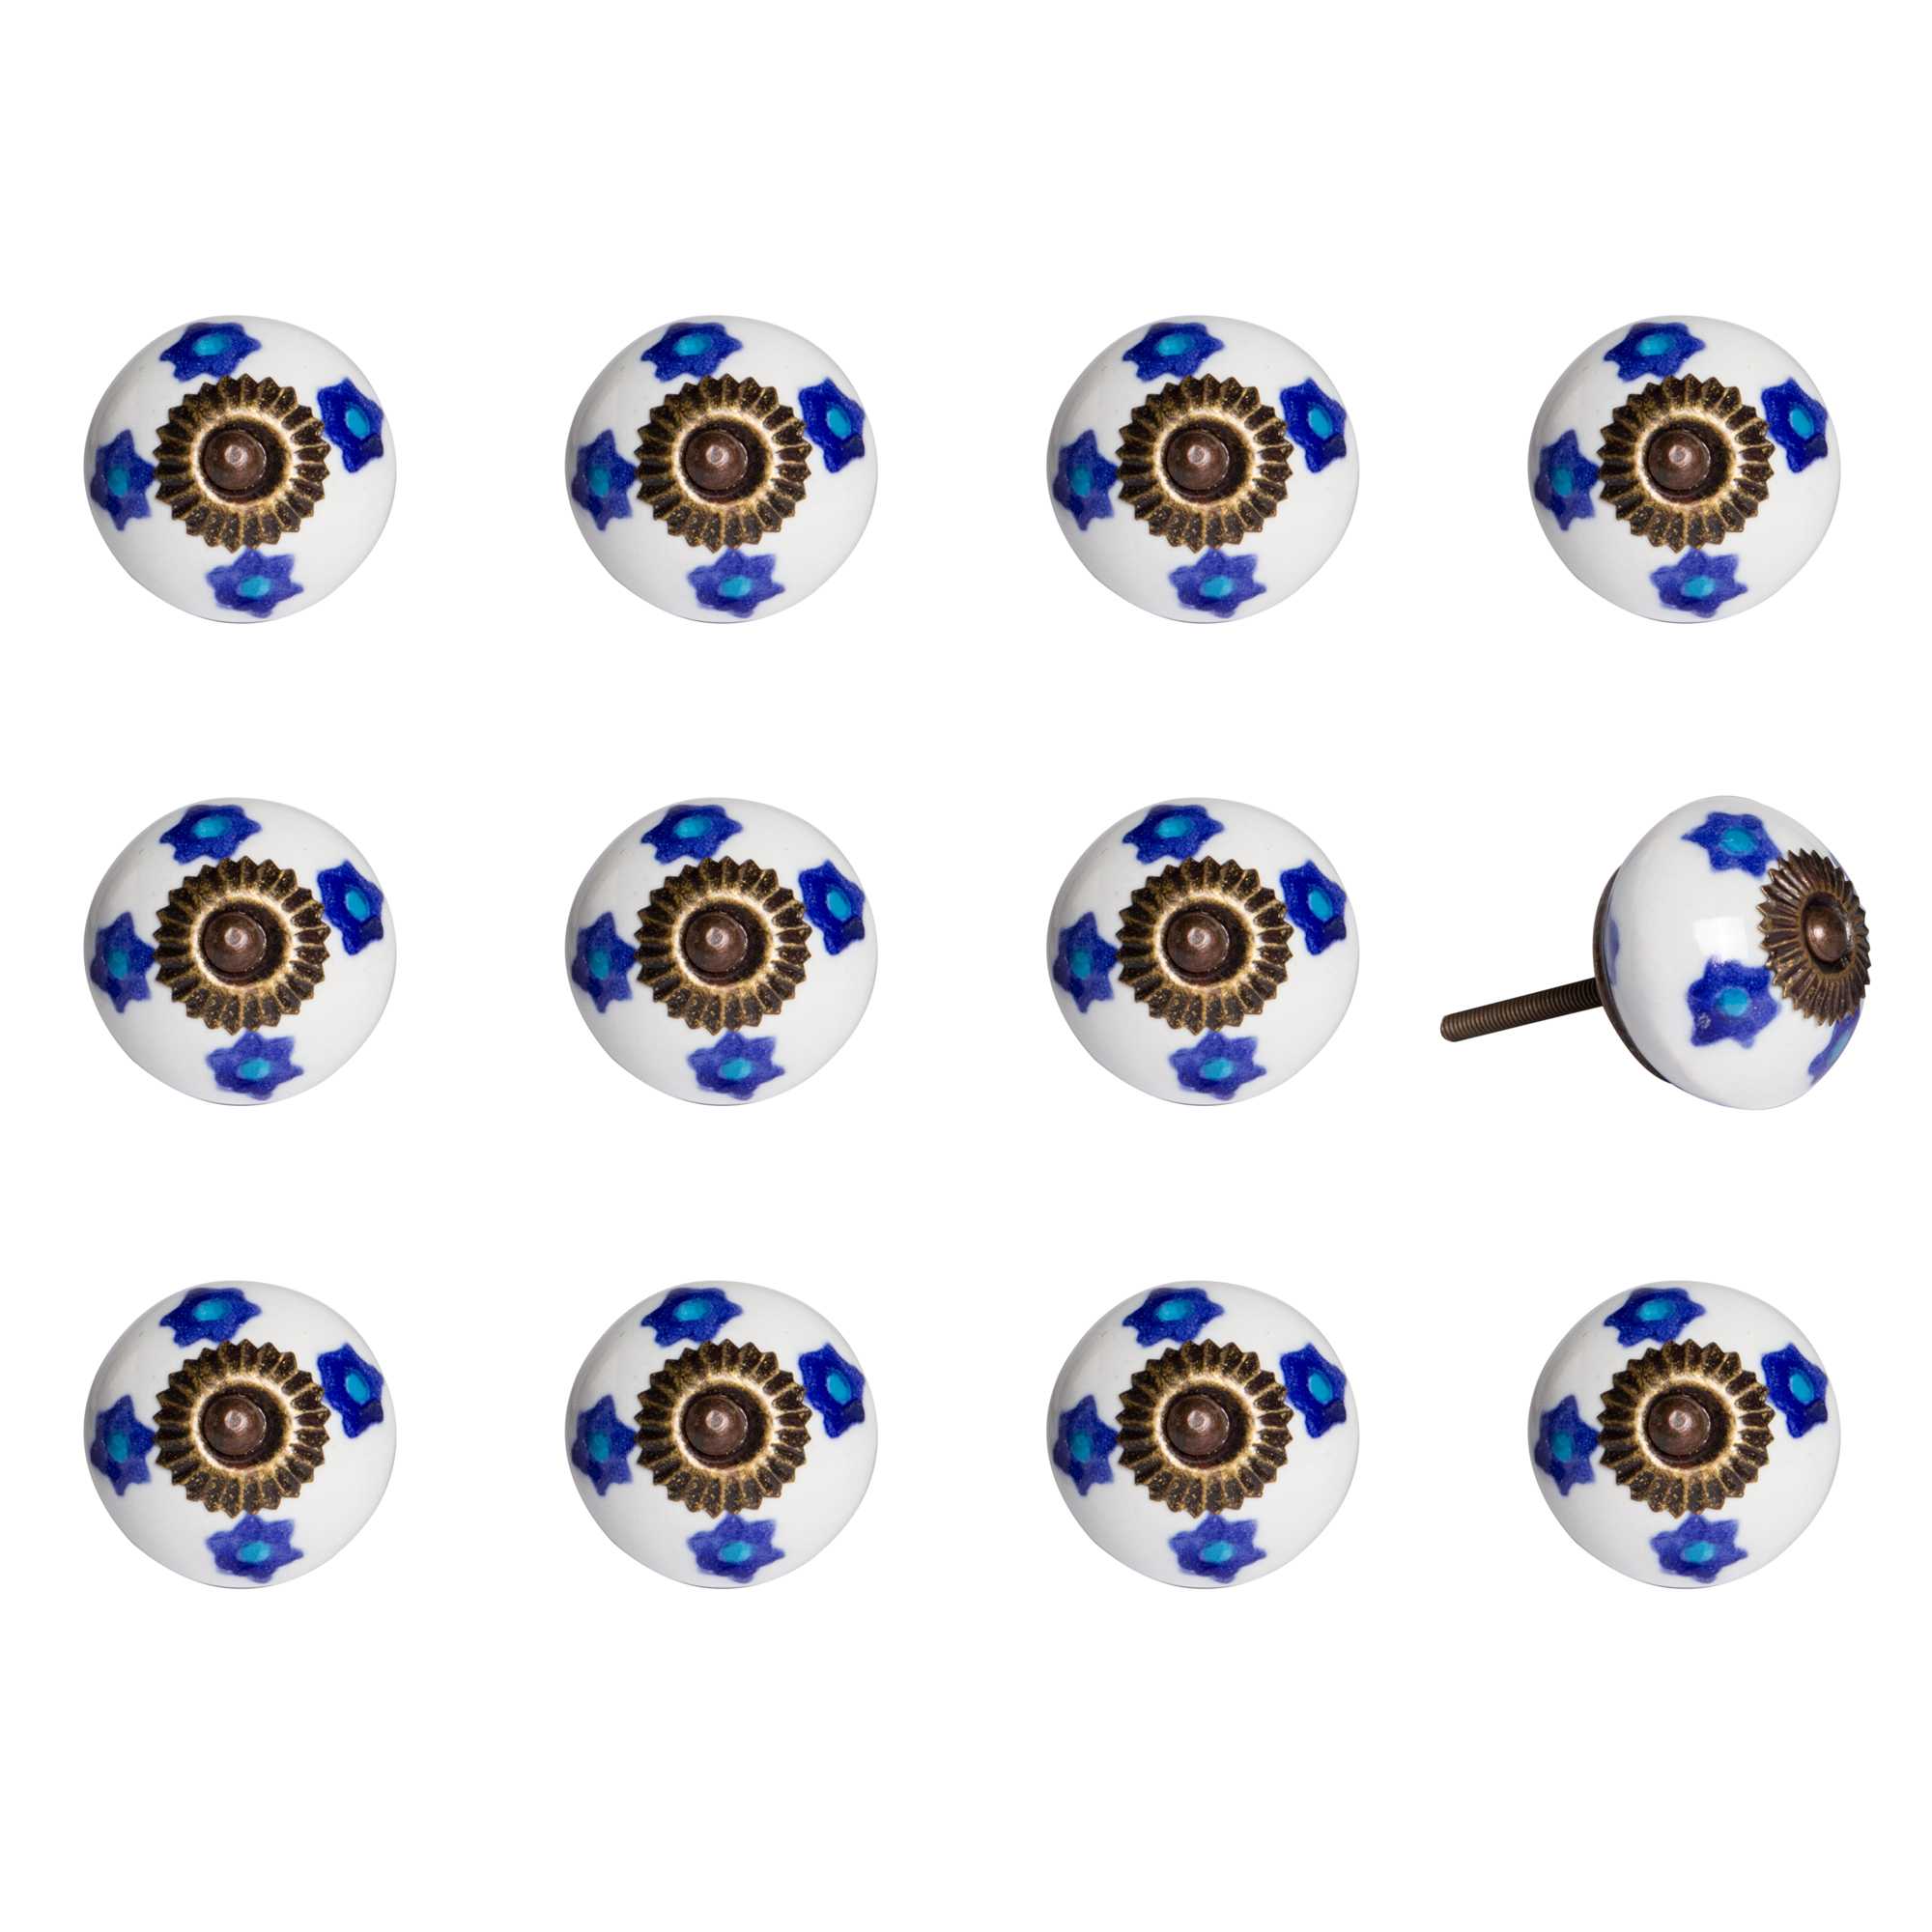 1.5" x 1.5" x 1.5" White, Blue and Turquoise - Knobs 12-Pack